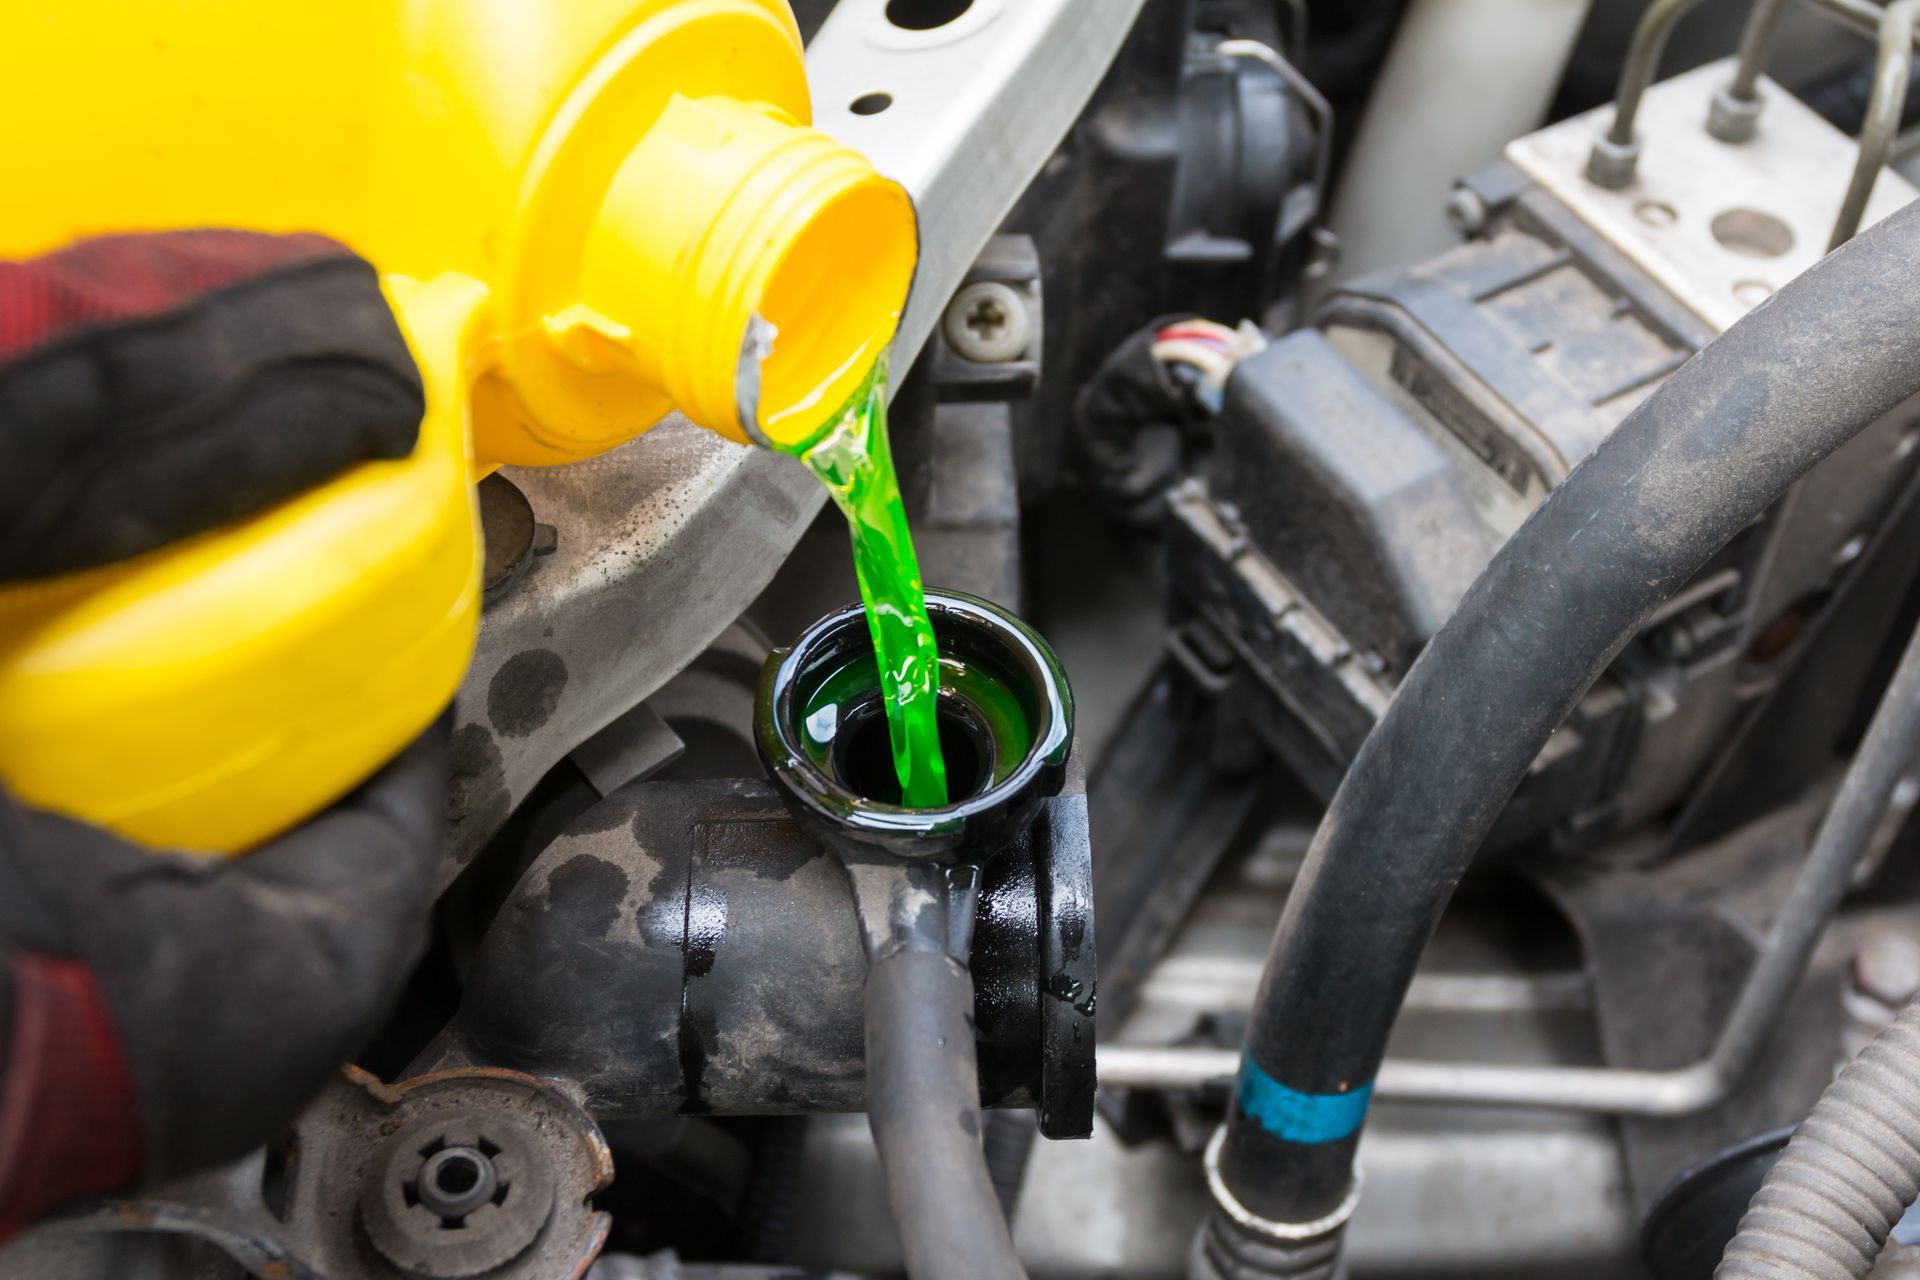 Coolant & Antifreeze at ﻿Brakes Tires & More﻿ in ﻿Yuba City, CA﻿